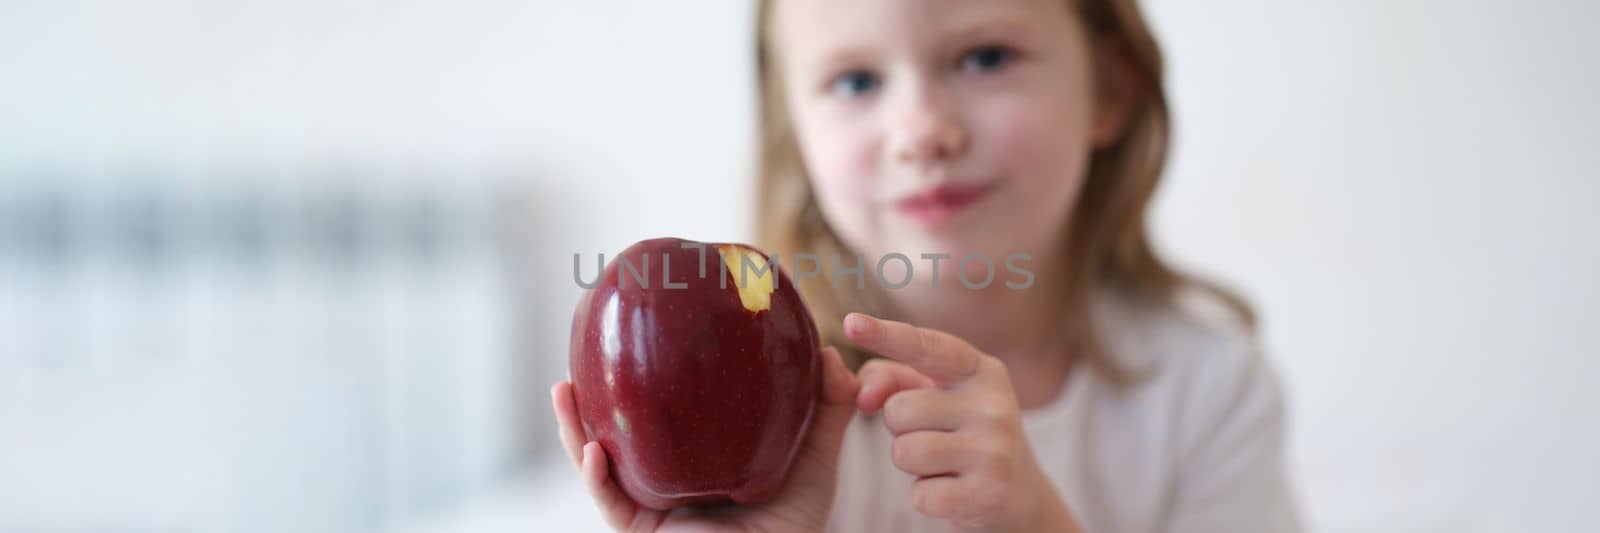 Girl child bites and eats big red apple by kuprevich